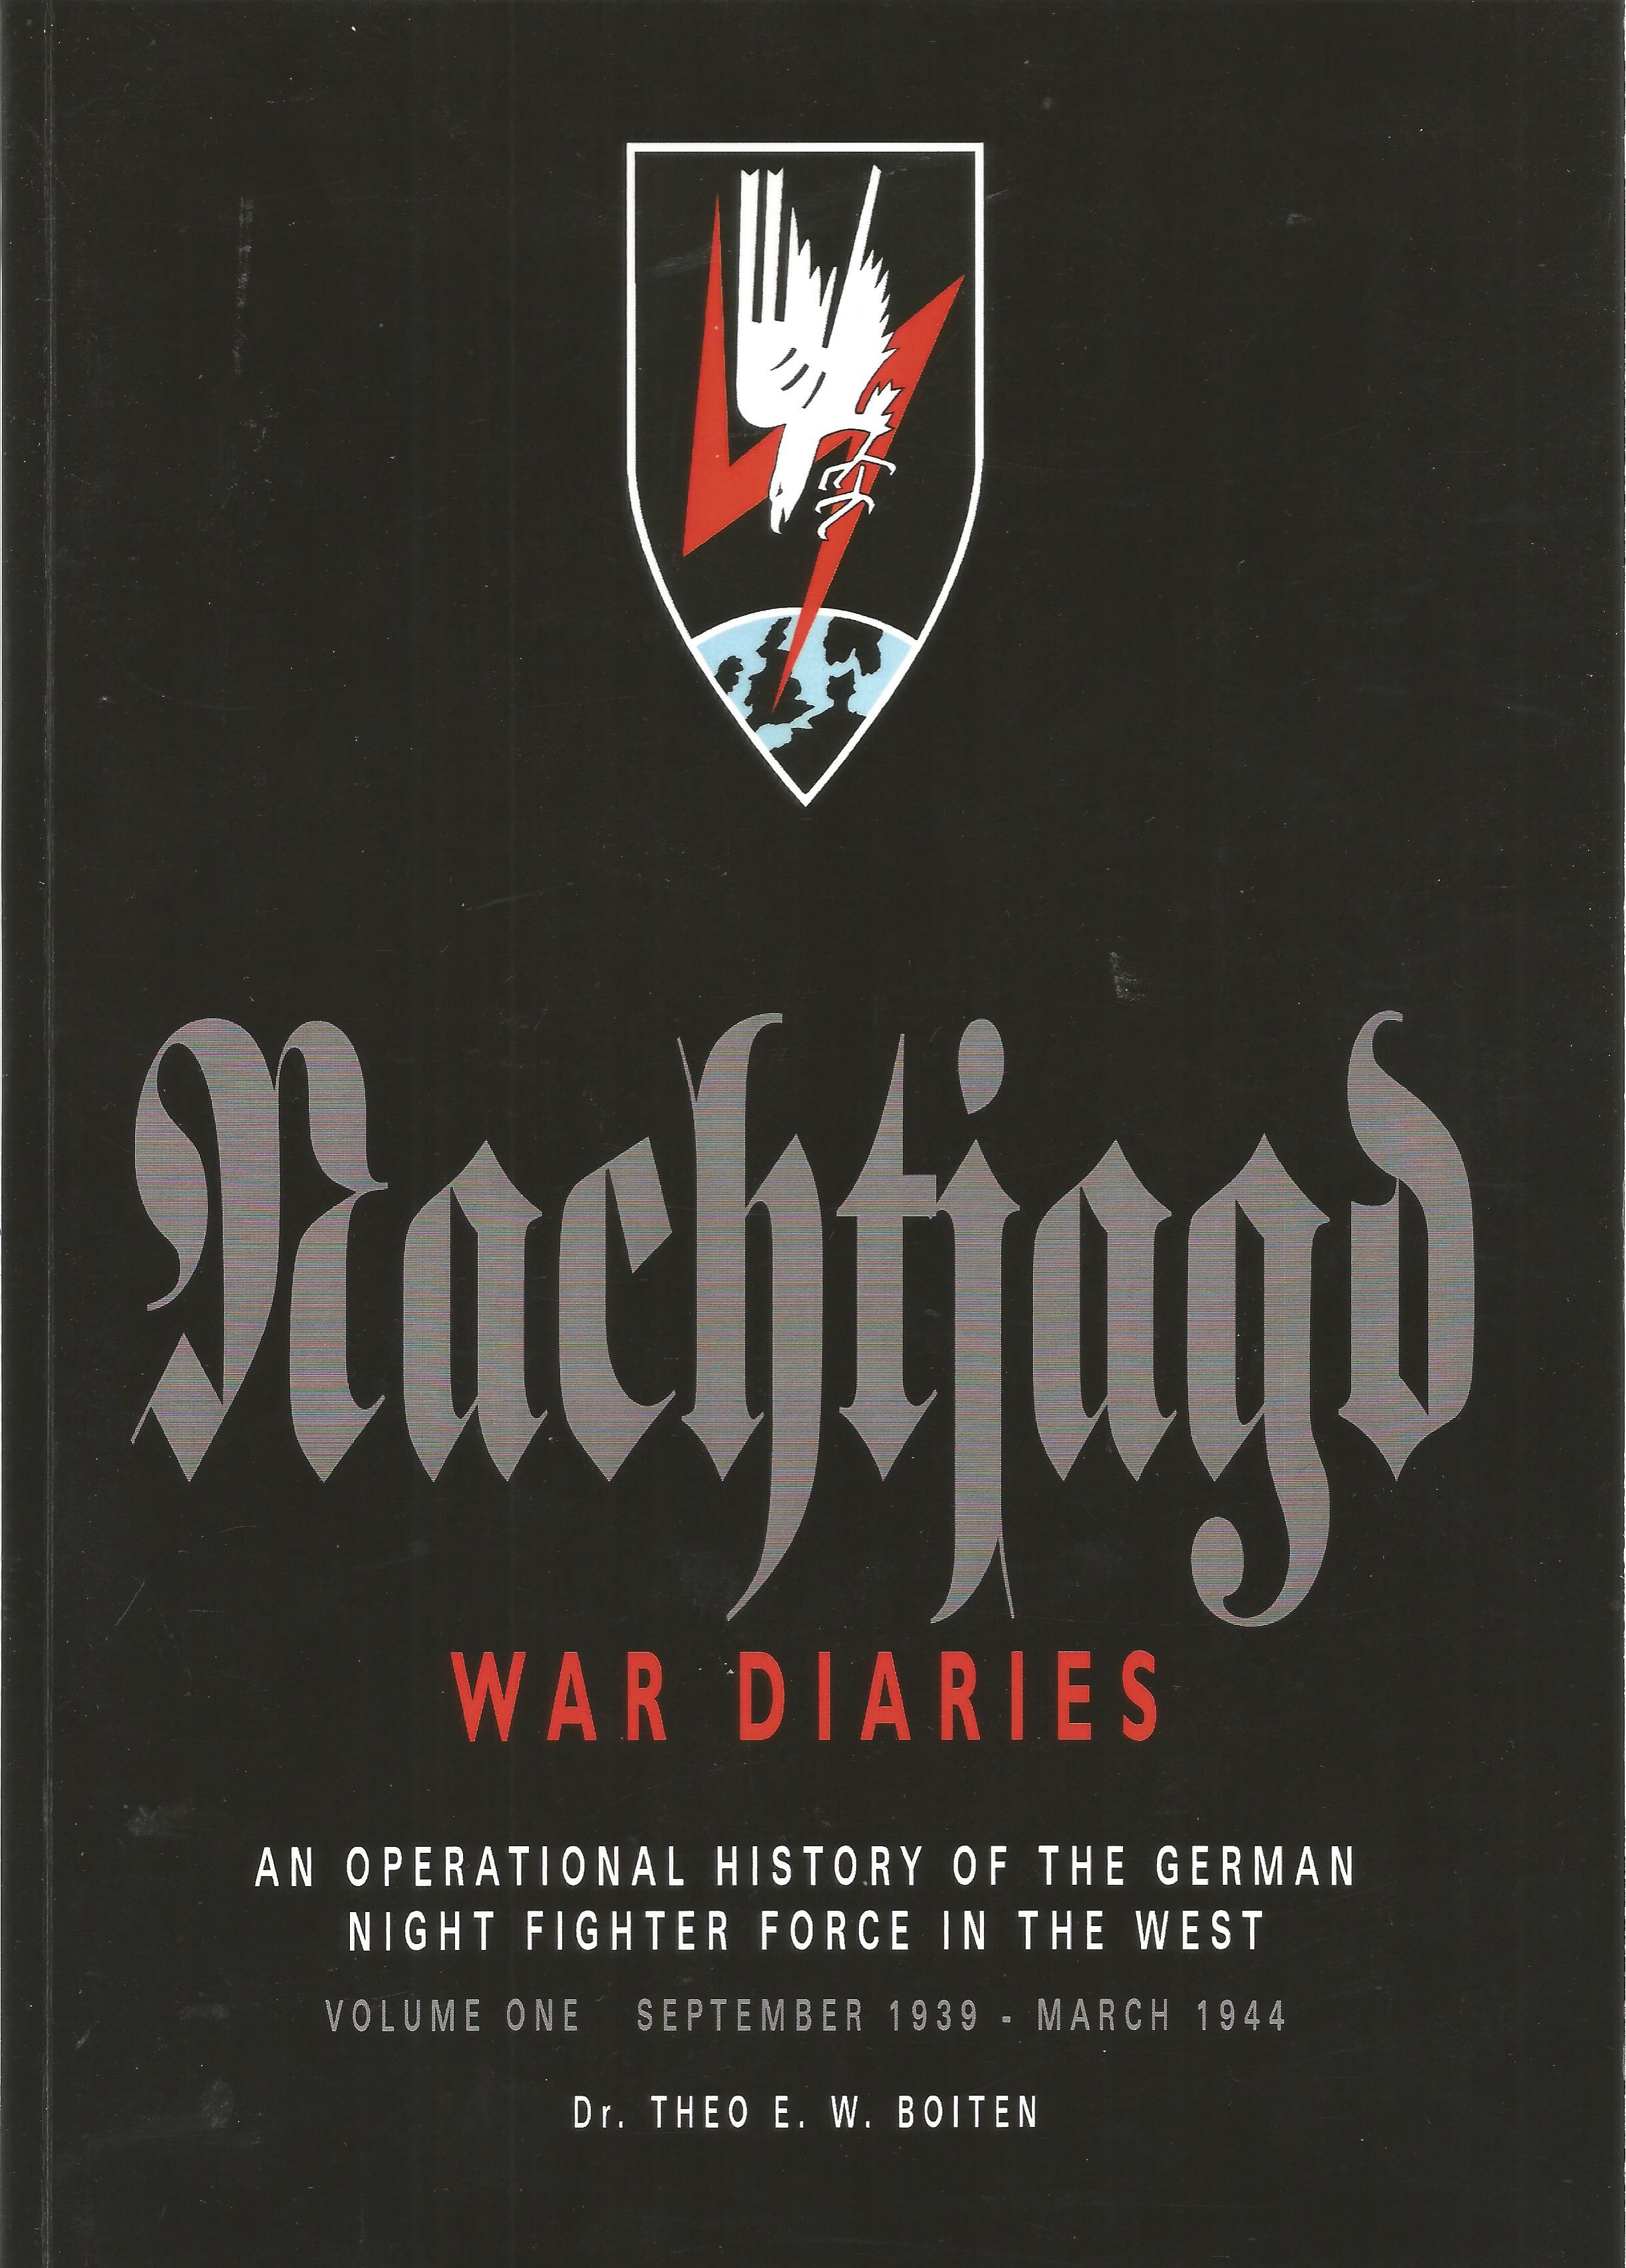 WWII multi signed Nachtjagd War Diaries Vol 1 An Operational History of the German Night Fighter